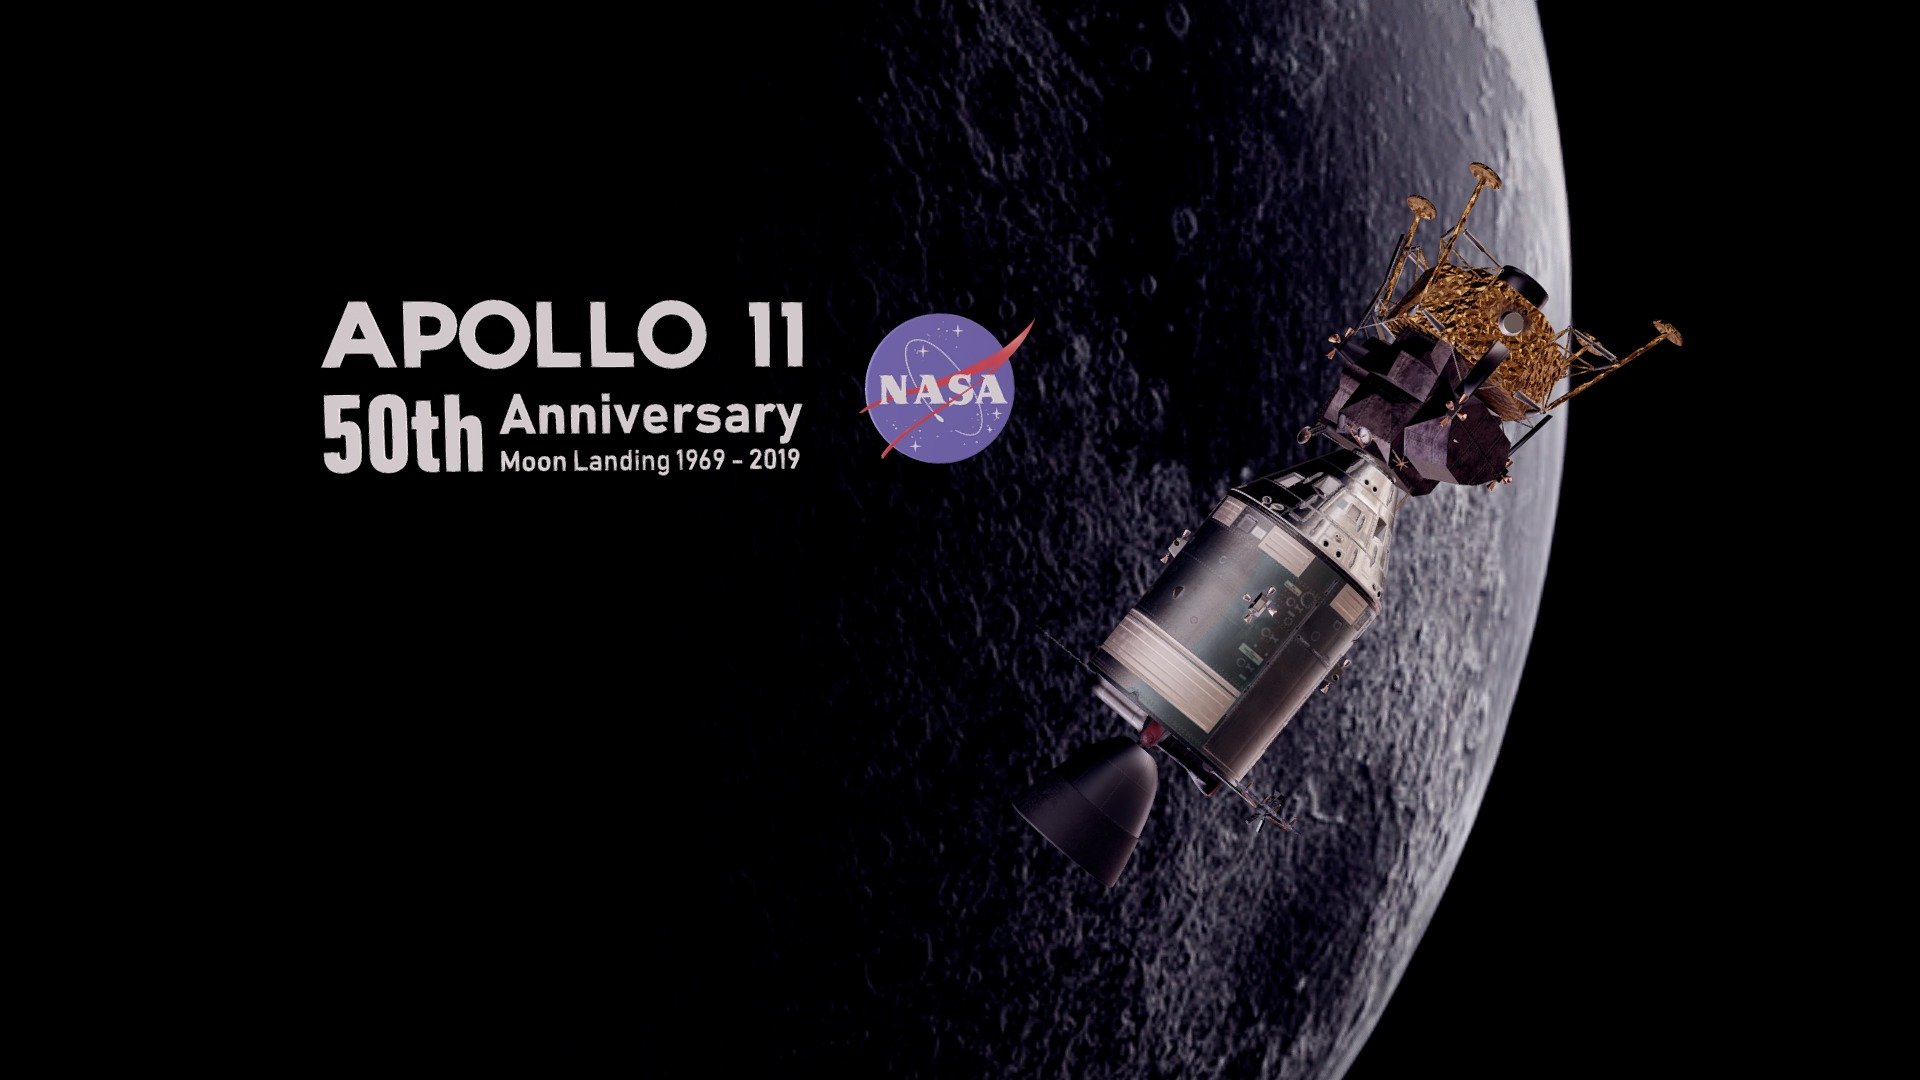 Apollo 11 50th anniversary
Extra 4k textures available for download

You can find the individual models here Apollo command and service module here Apollo Command Module and here Lunar Module - LEM - Apollo program - Apollo command, Service module and Lunar Module - Buy Royalty Free 3D model by msanjurj 3d model